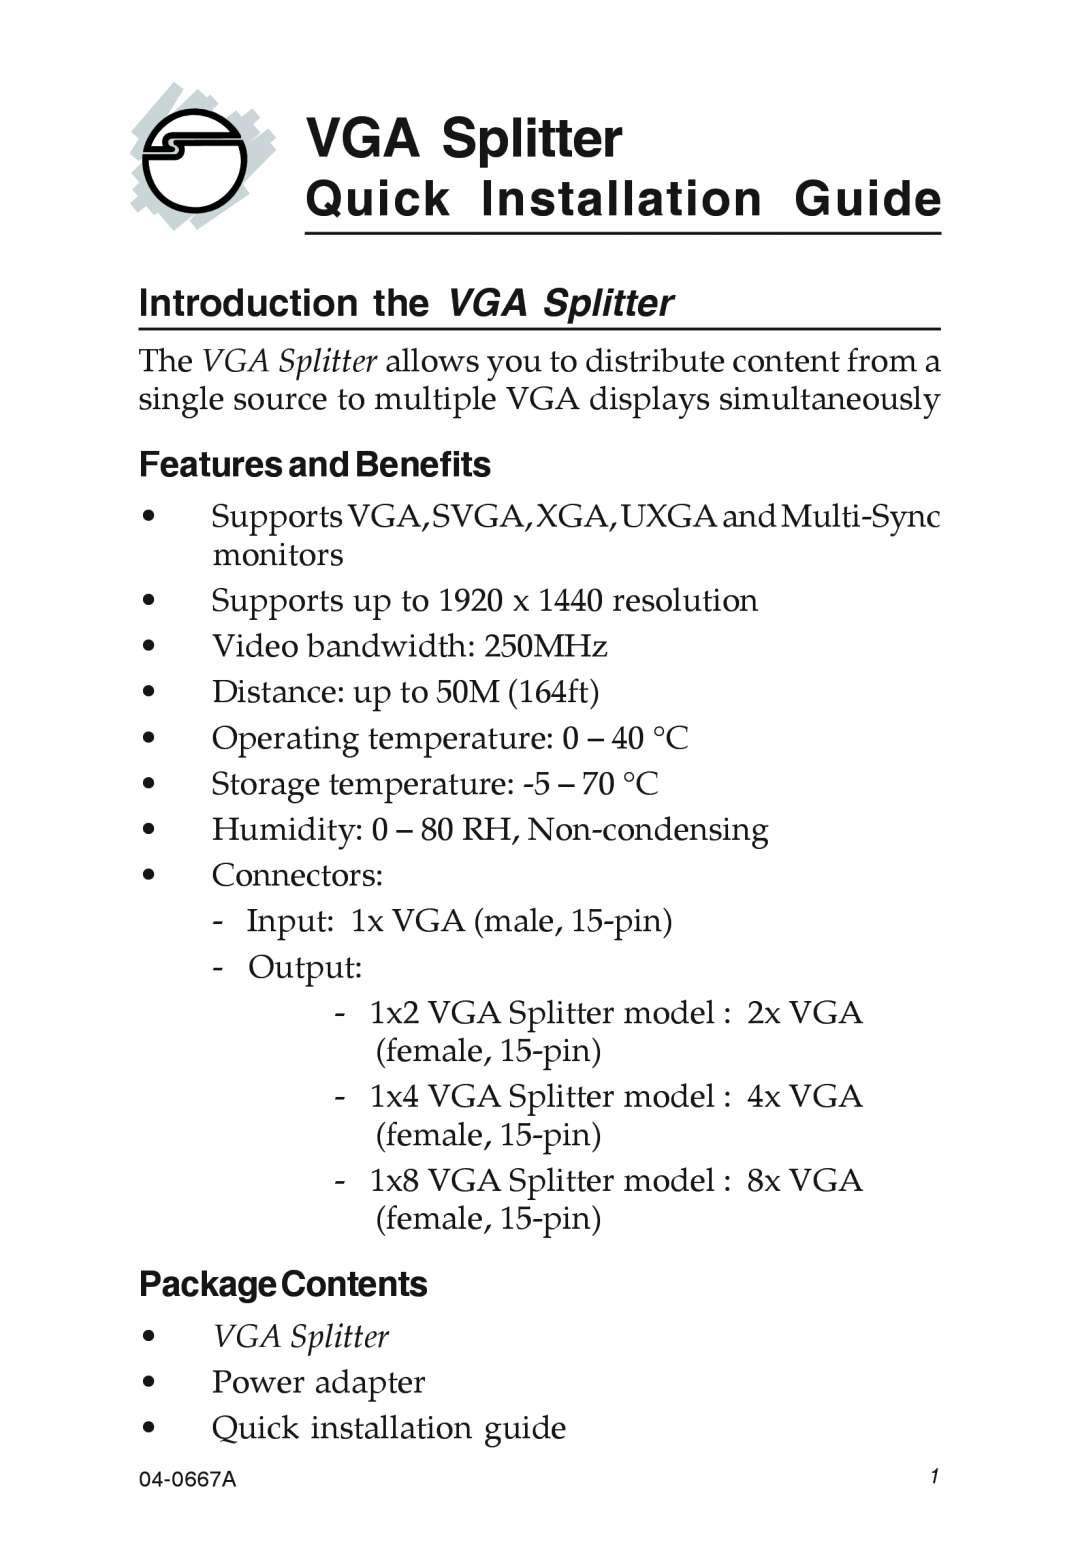 SIIG 16556380 manual Introduction the VGA Splitter, Features and Benefits, PackageContents, Quick Installation Guide 